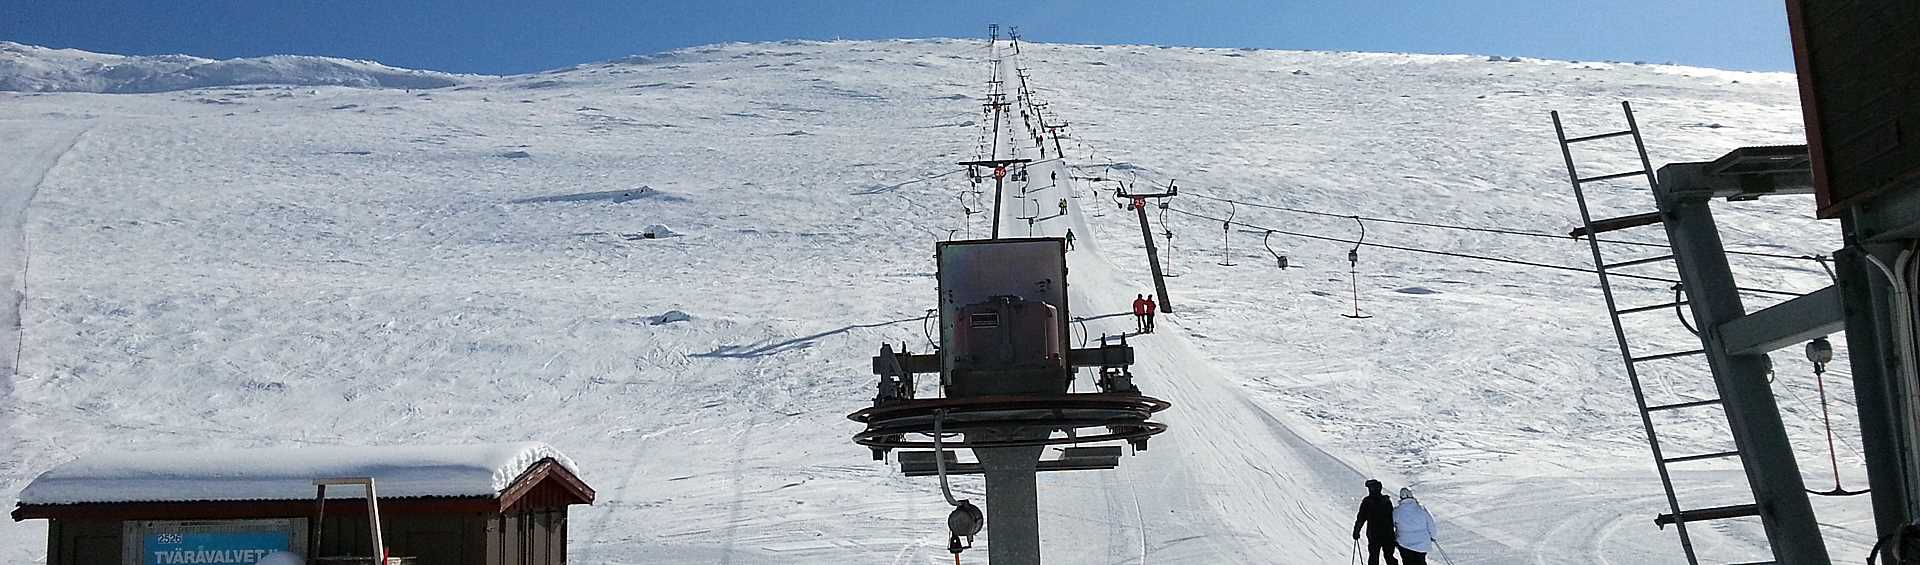 Skiers travelling in ski lift upwards a mountain slope